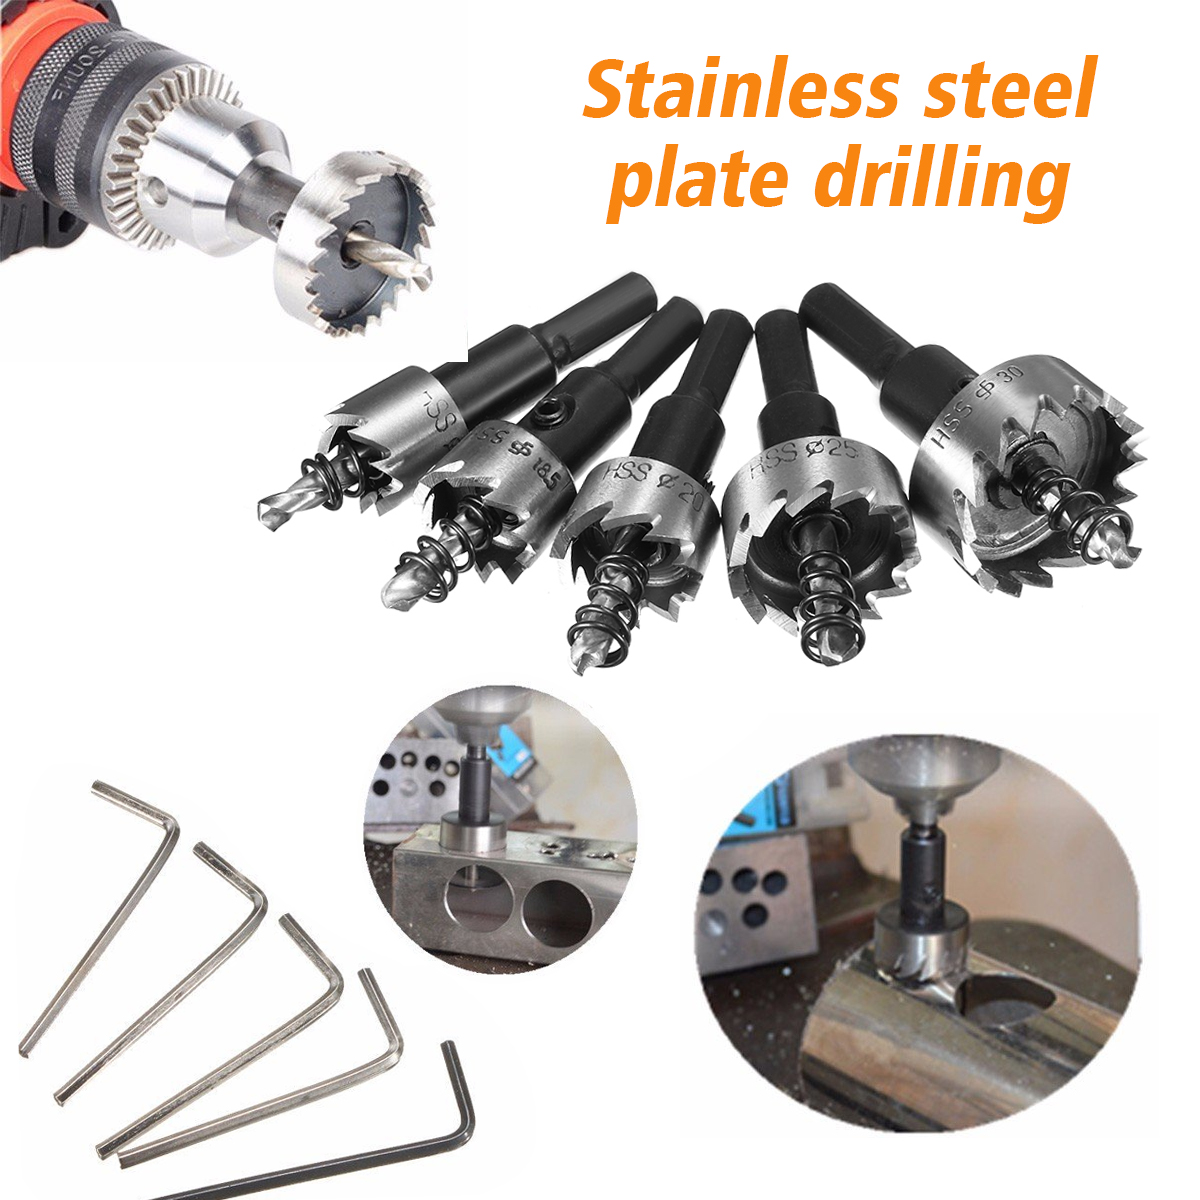 5Pcs-Saw-Tooth-HSS-Drill-Bit-Hole-Saw-Set-Stainless-Steel-Metal-Alloy-16-30mm-1203295-1